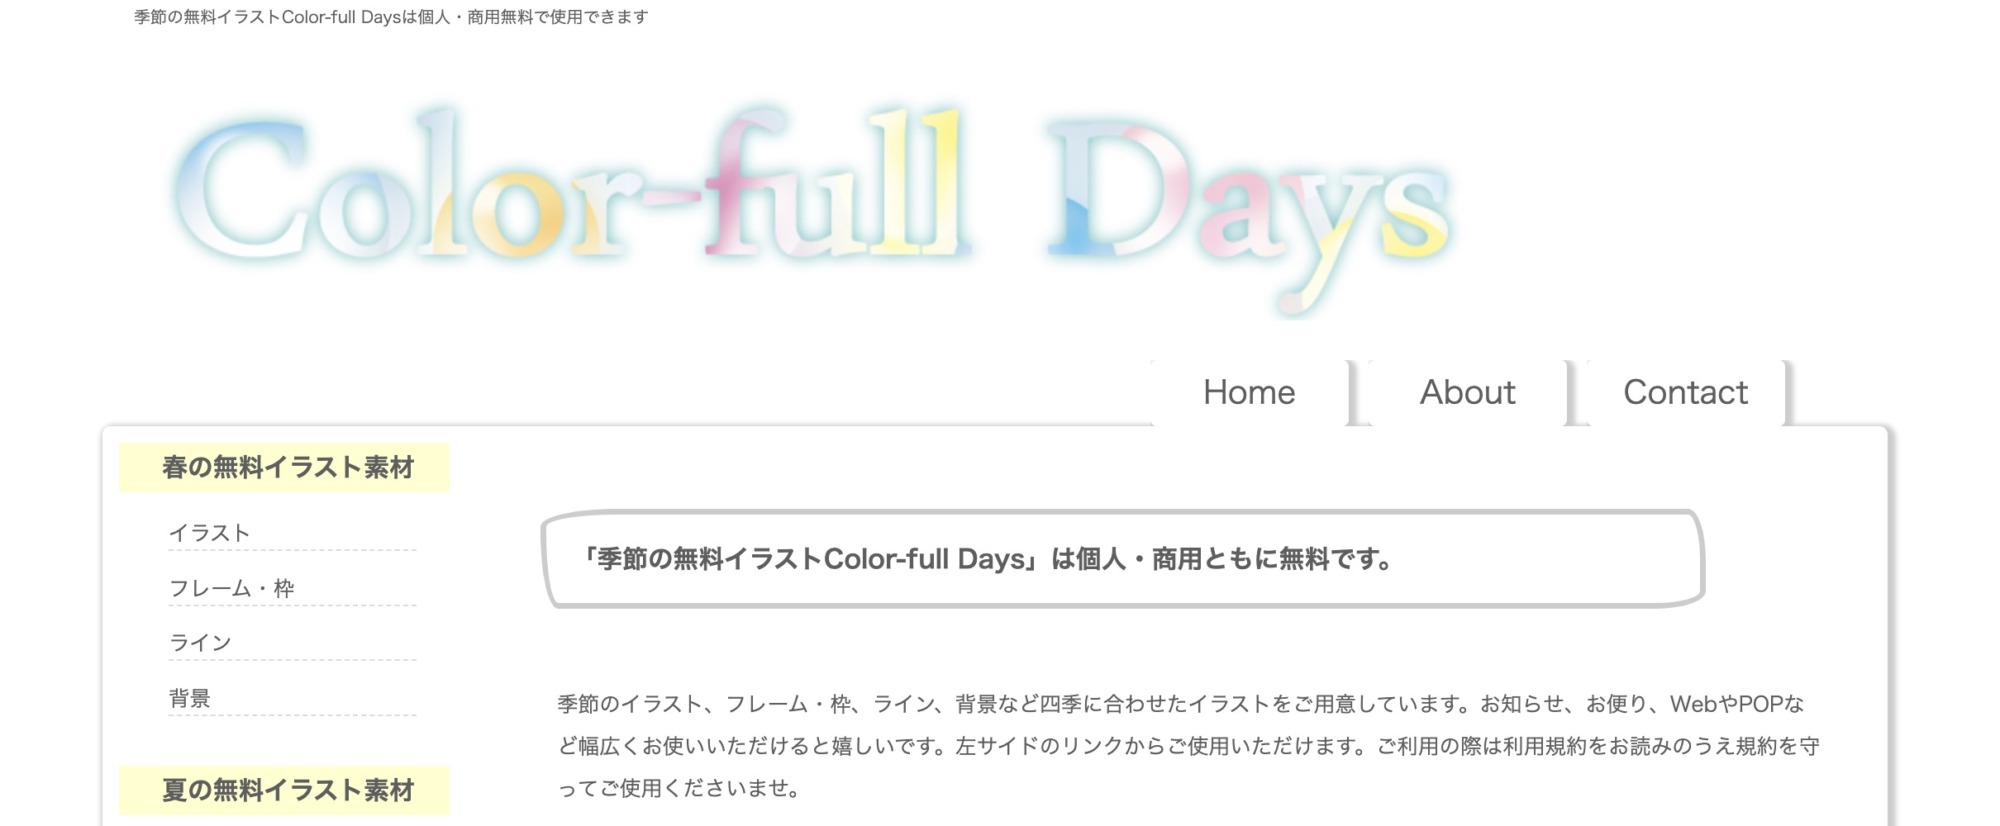 Color-full Days